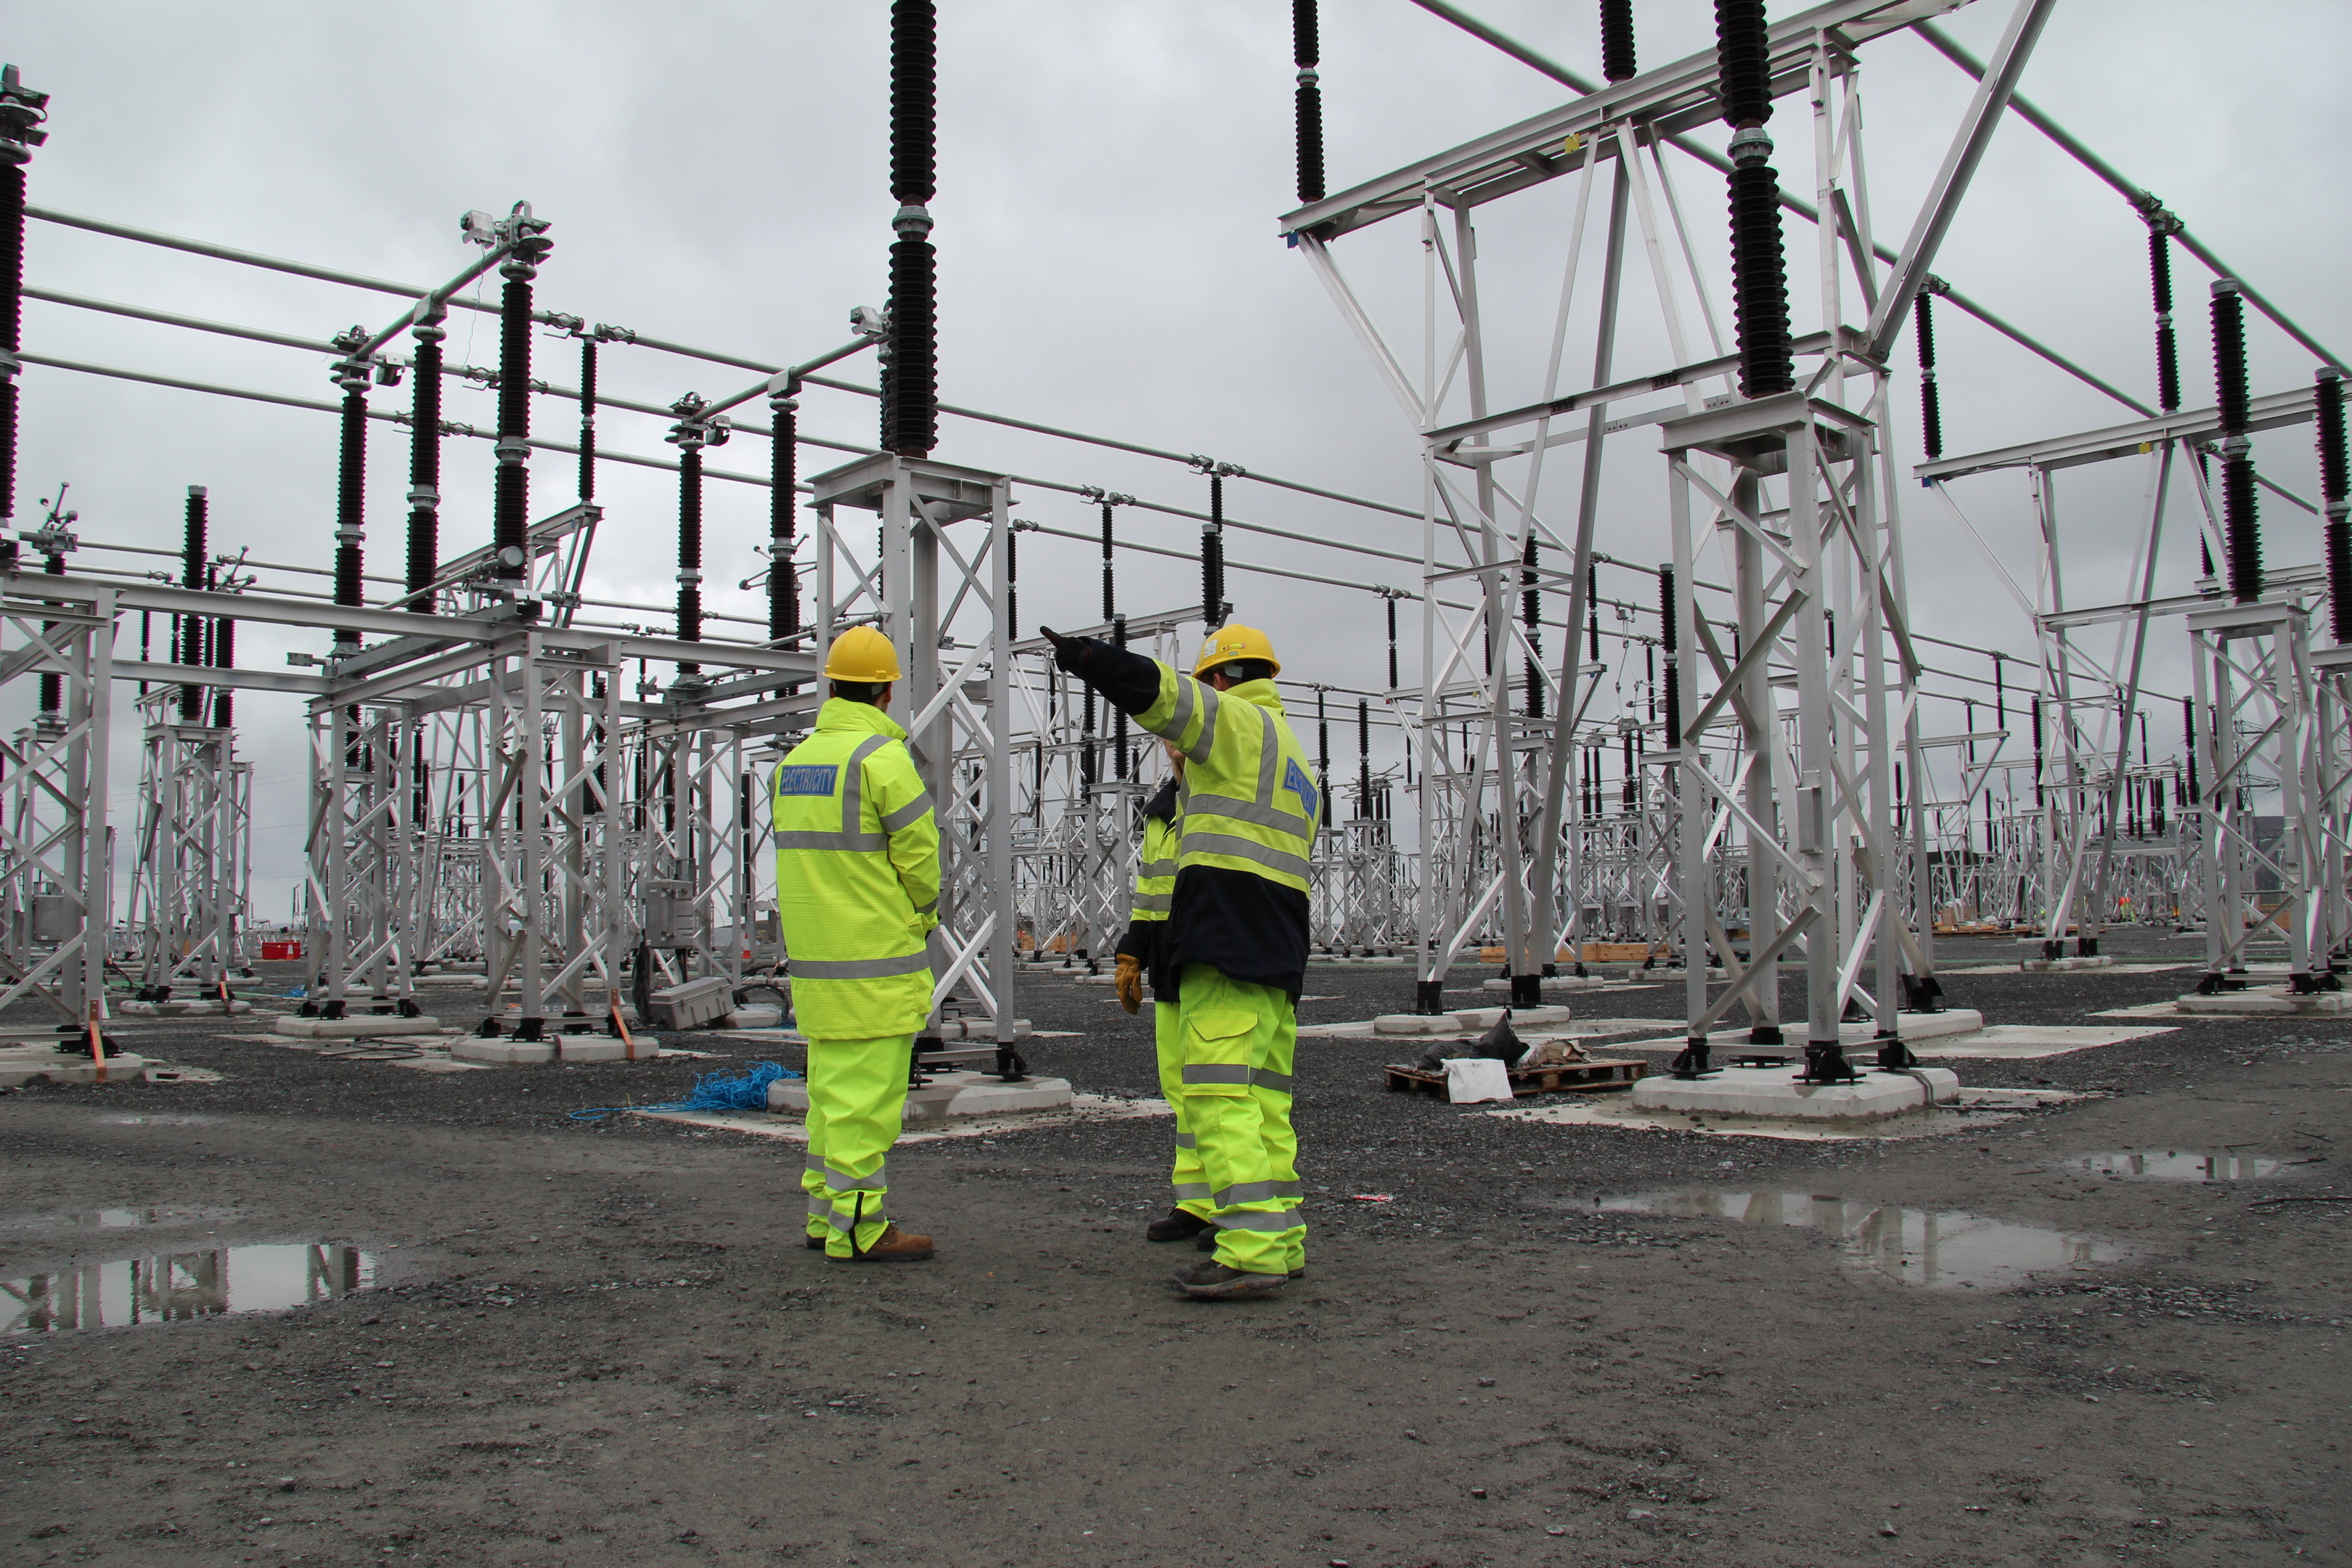 Blackhillock substation, near Keith, is the largest in the UK.